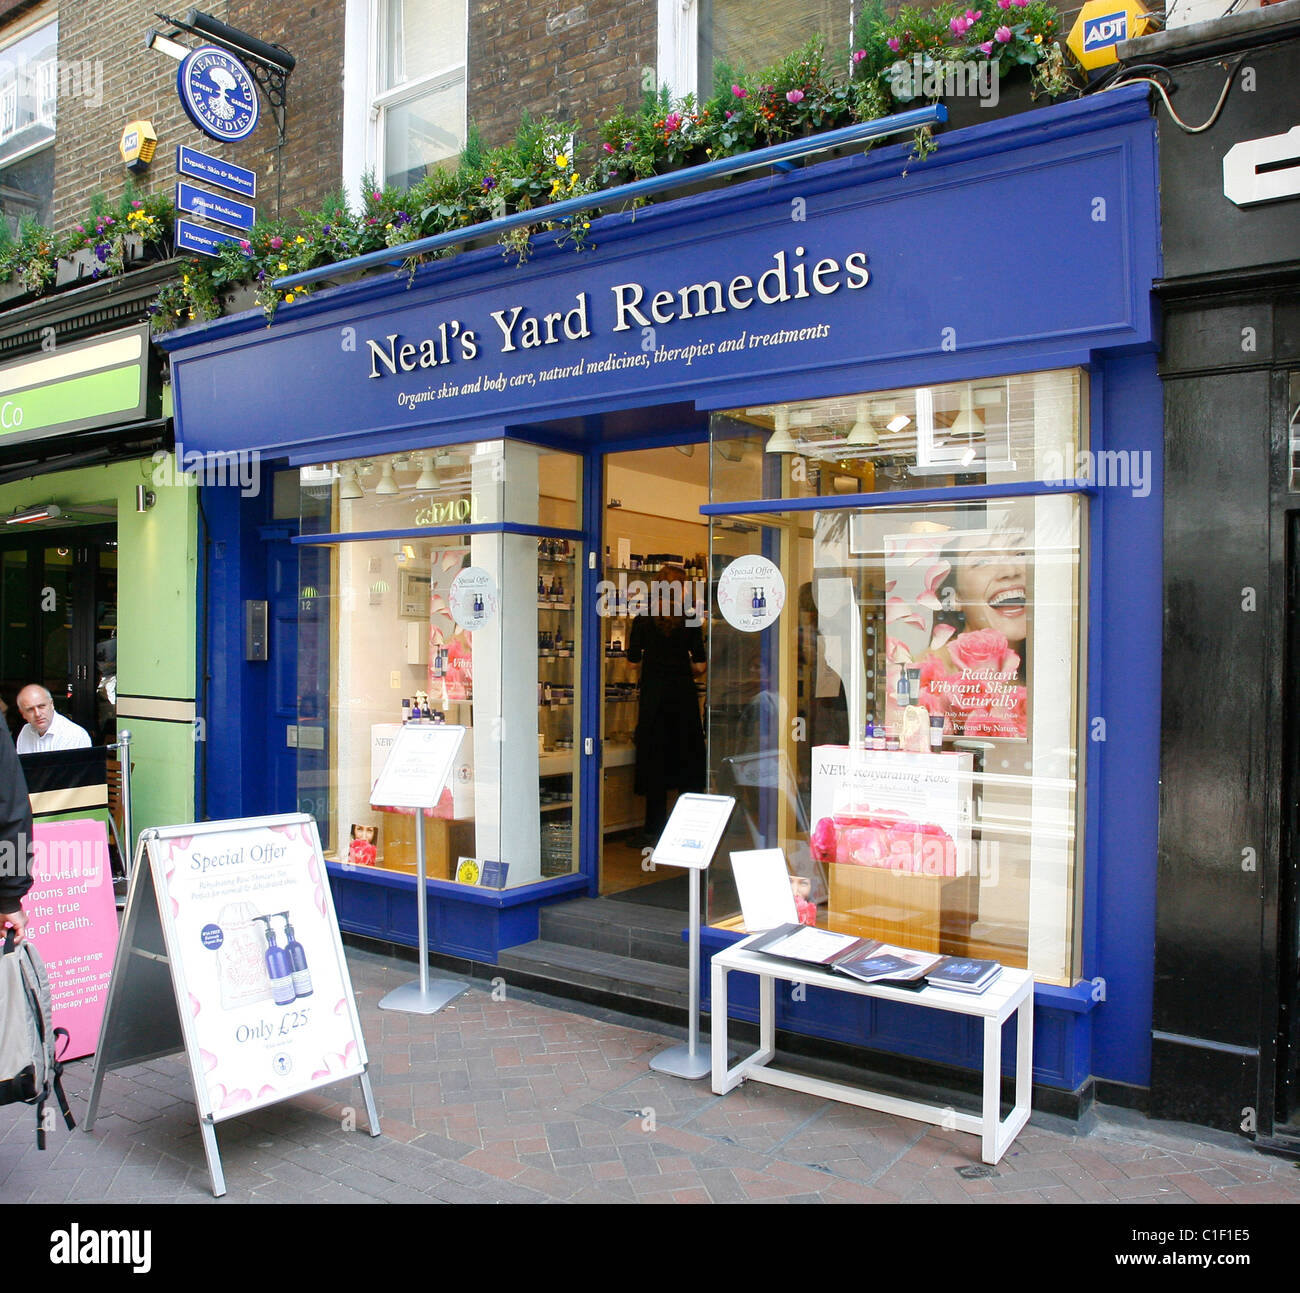 Neal's Yard Remedies store in Central London London, England - 11.05.09 Stock Photo